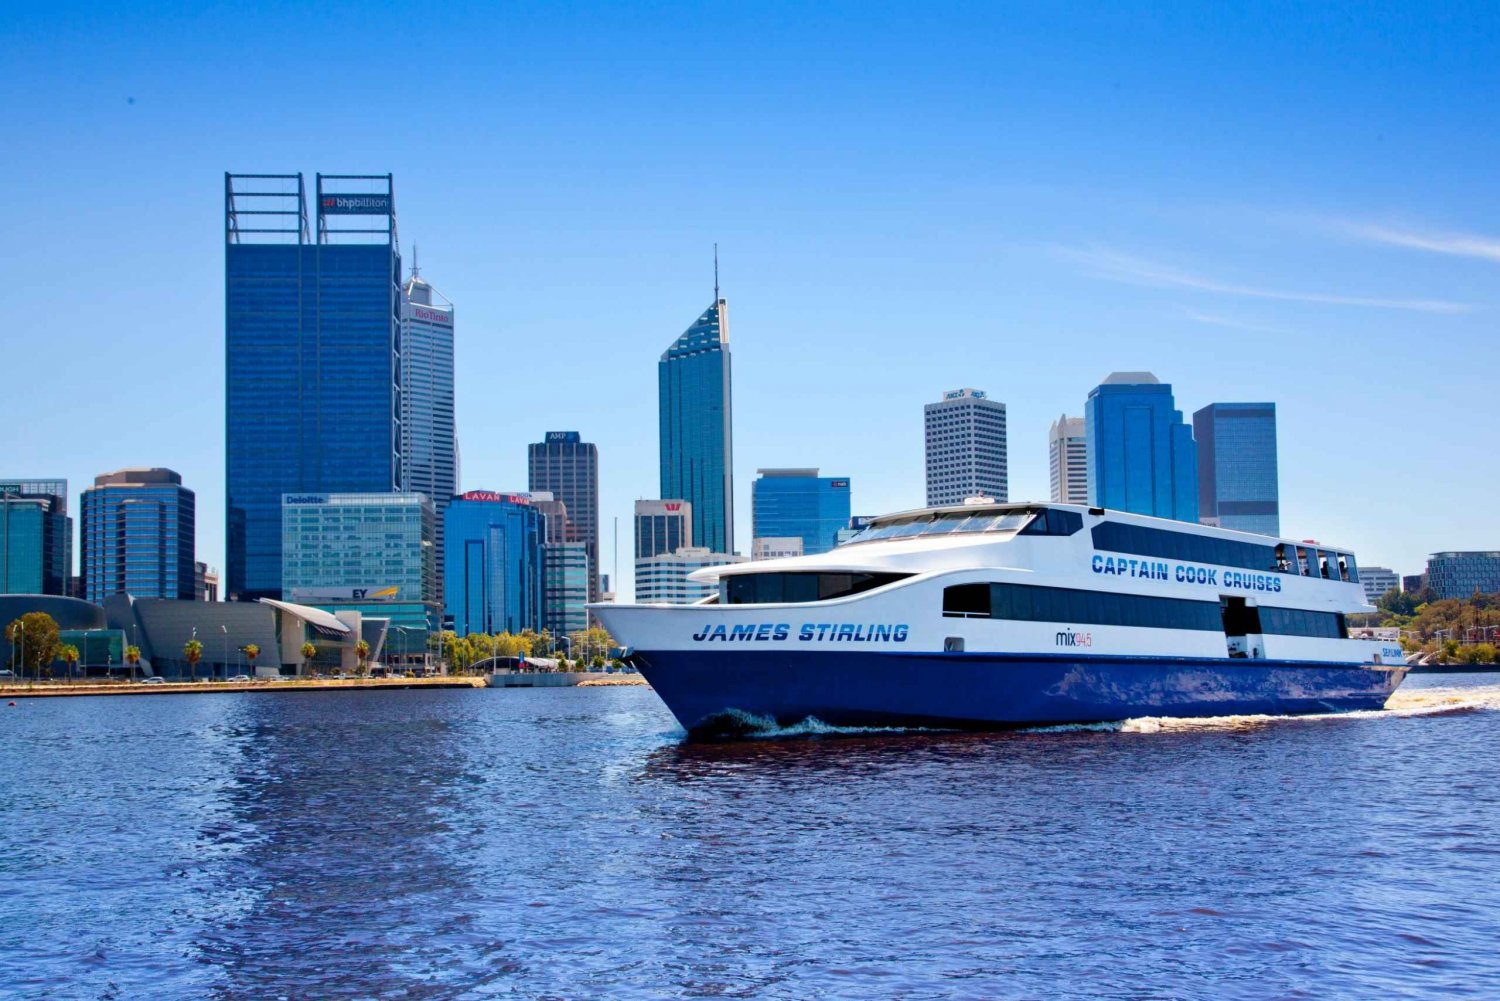 Swan River: Round-Trip Cruise from Perth or Fremantle